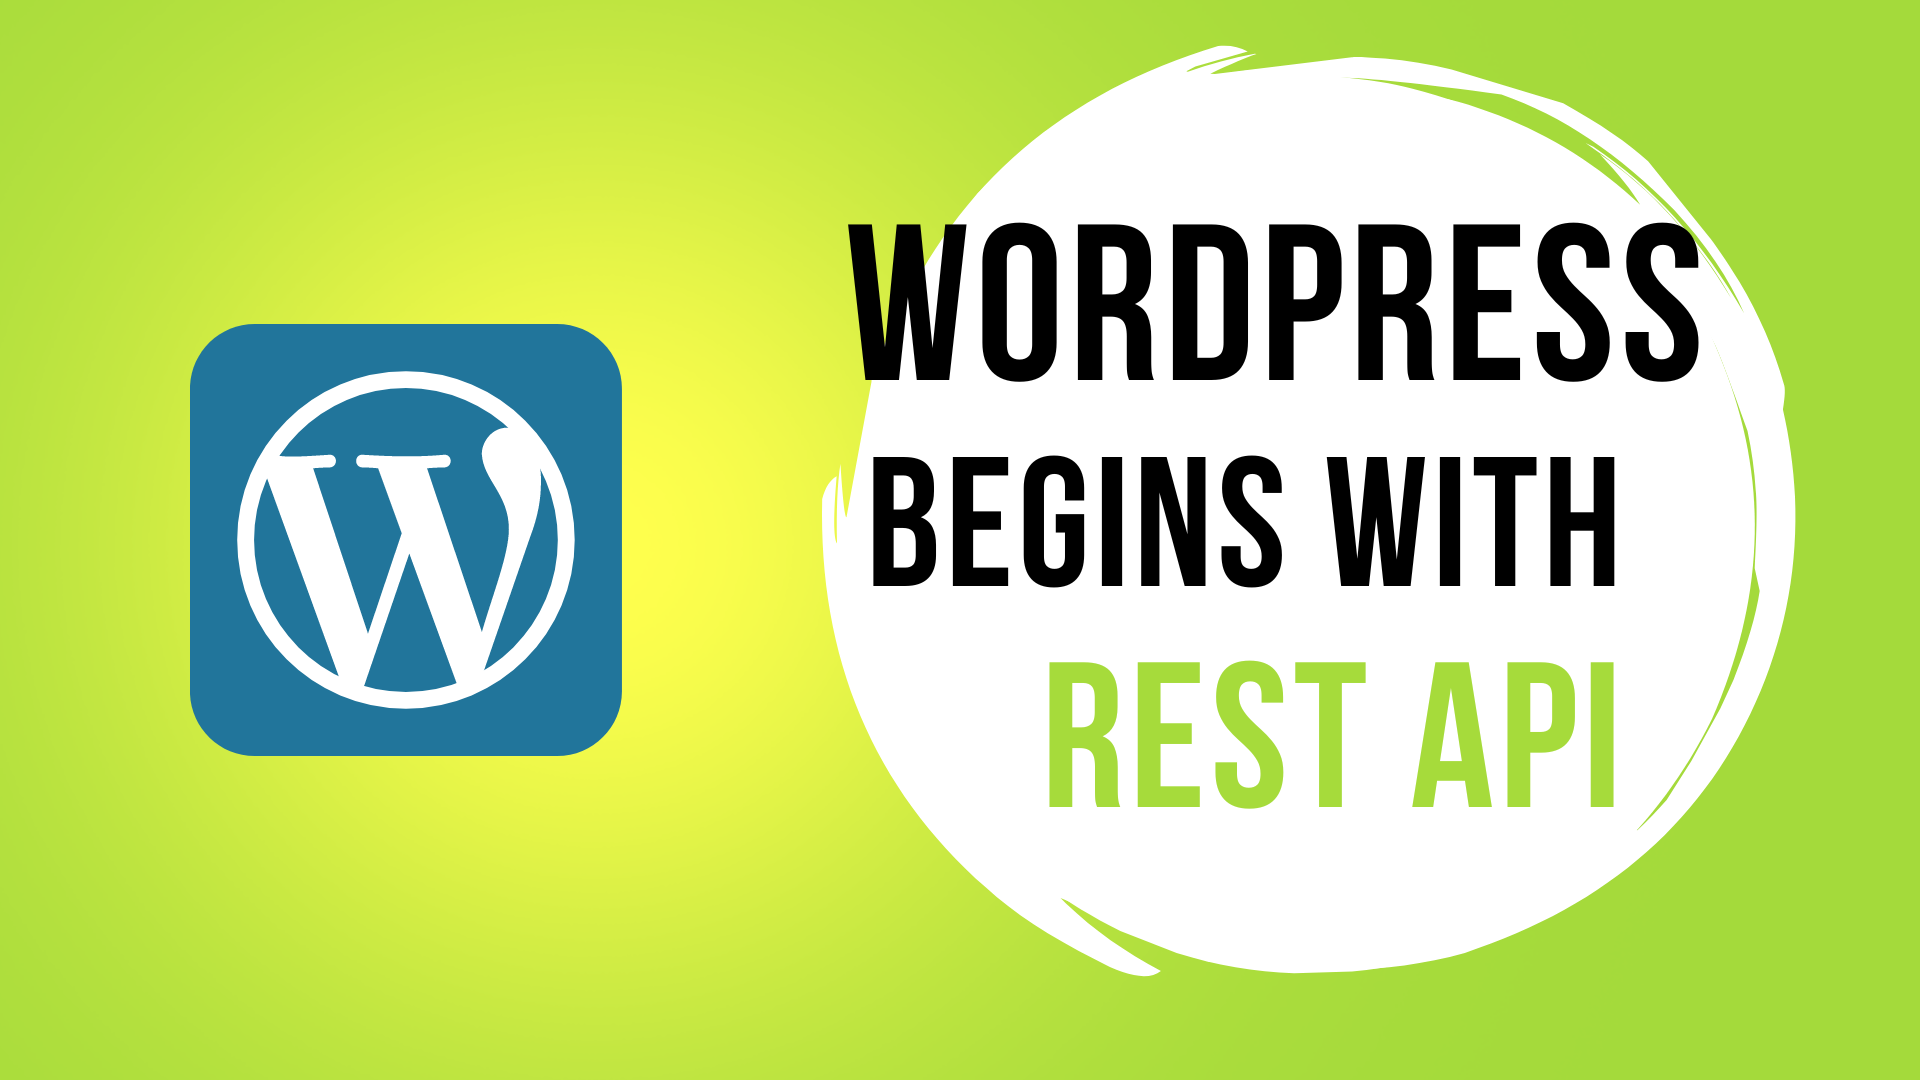 WordPress begins with REST API – Display others blogs latest posts